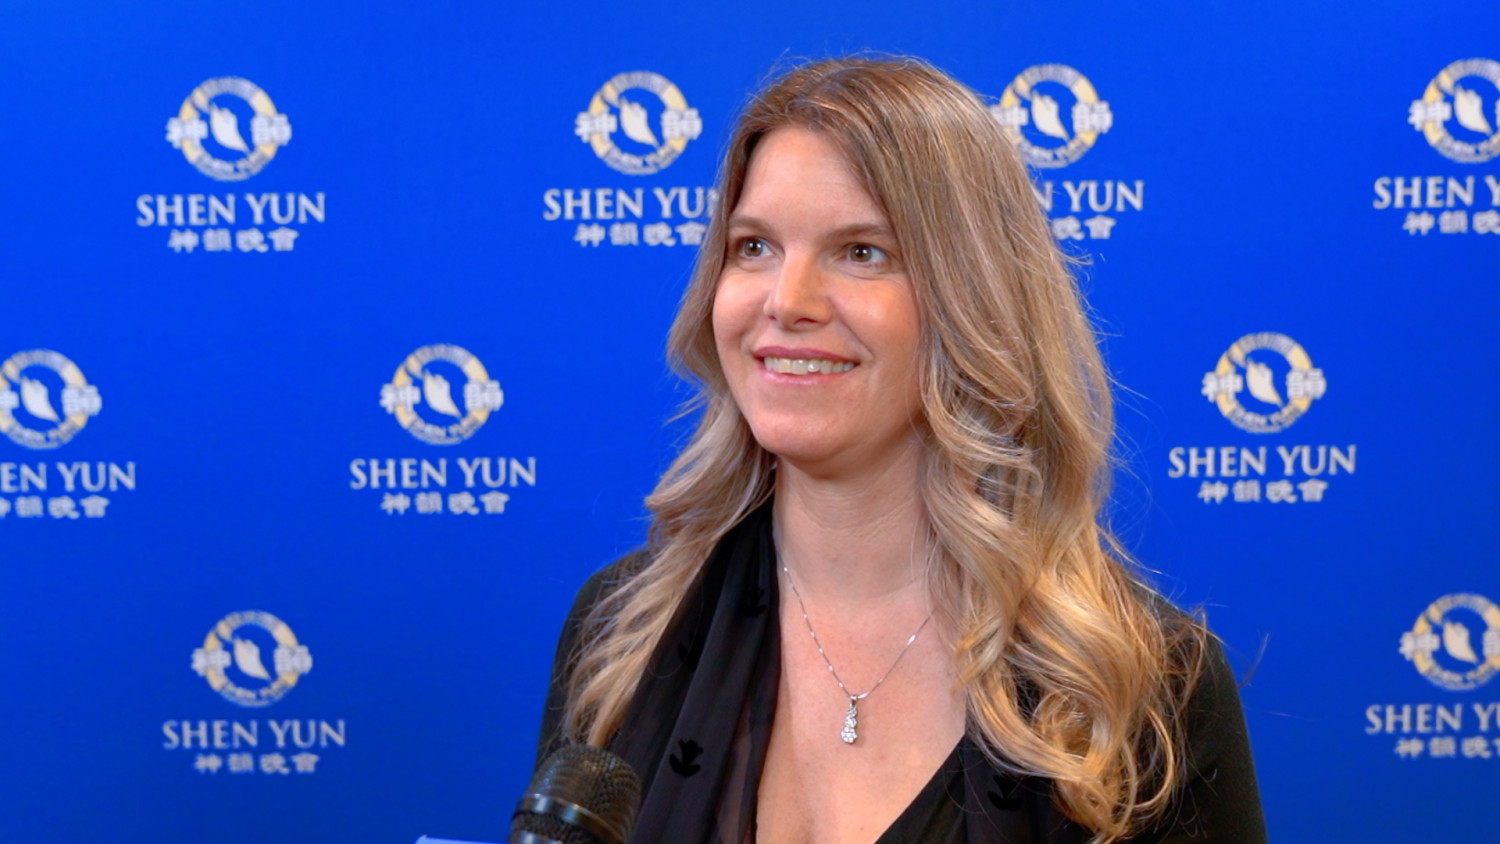 Producer: Shen Yun Performance is ‘Otherworldly’